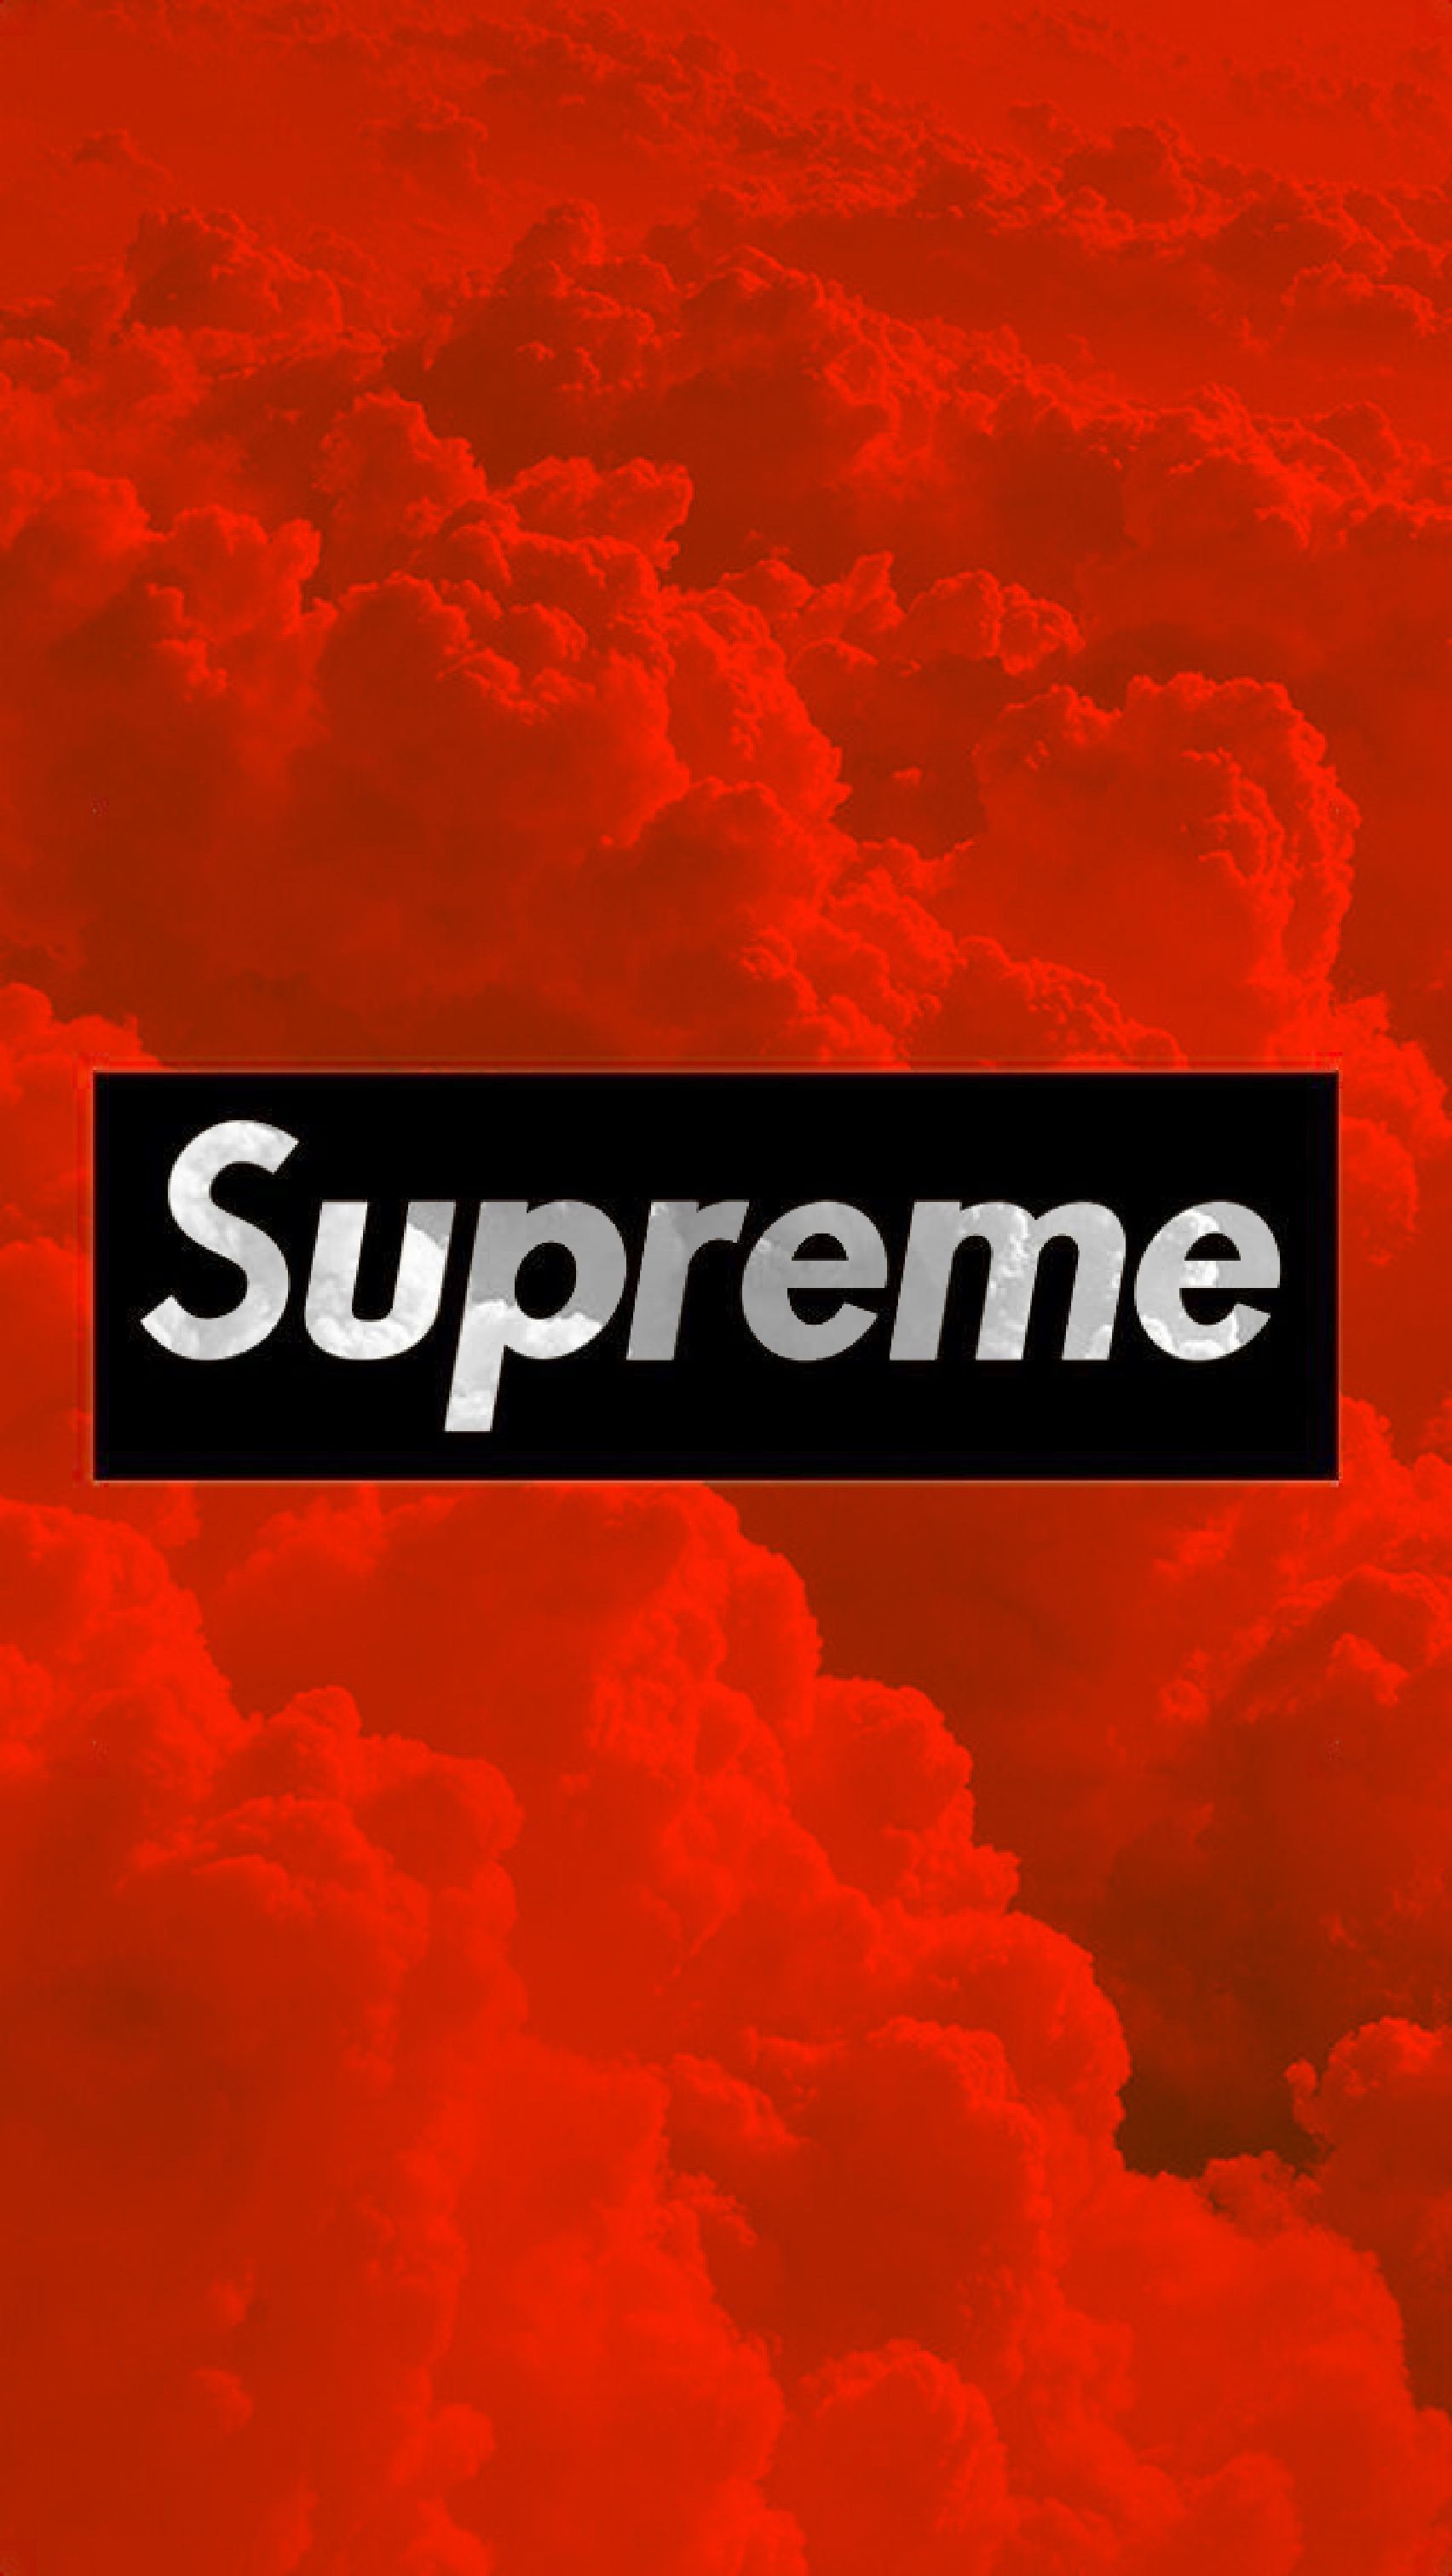 ▷ 1001+ ideas For a Cool and Fresh Supreme Wallpaper  Supreme iphone  wallpaper, Supreme wallpaper, Iphone wallpaper